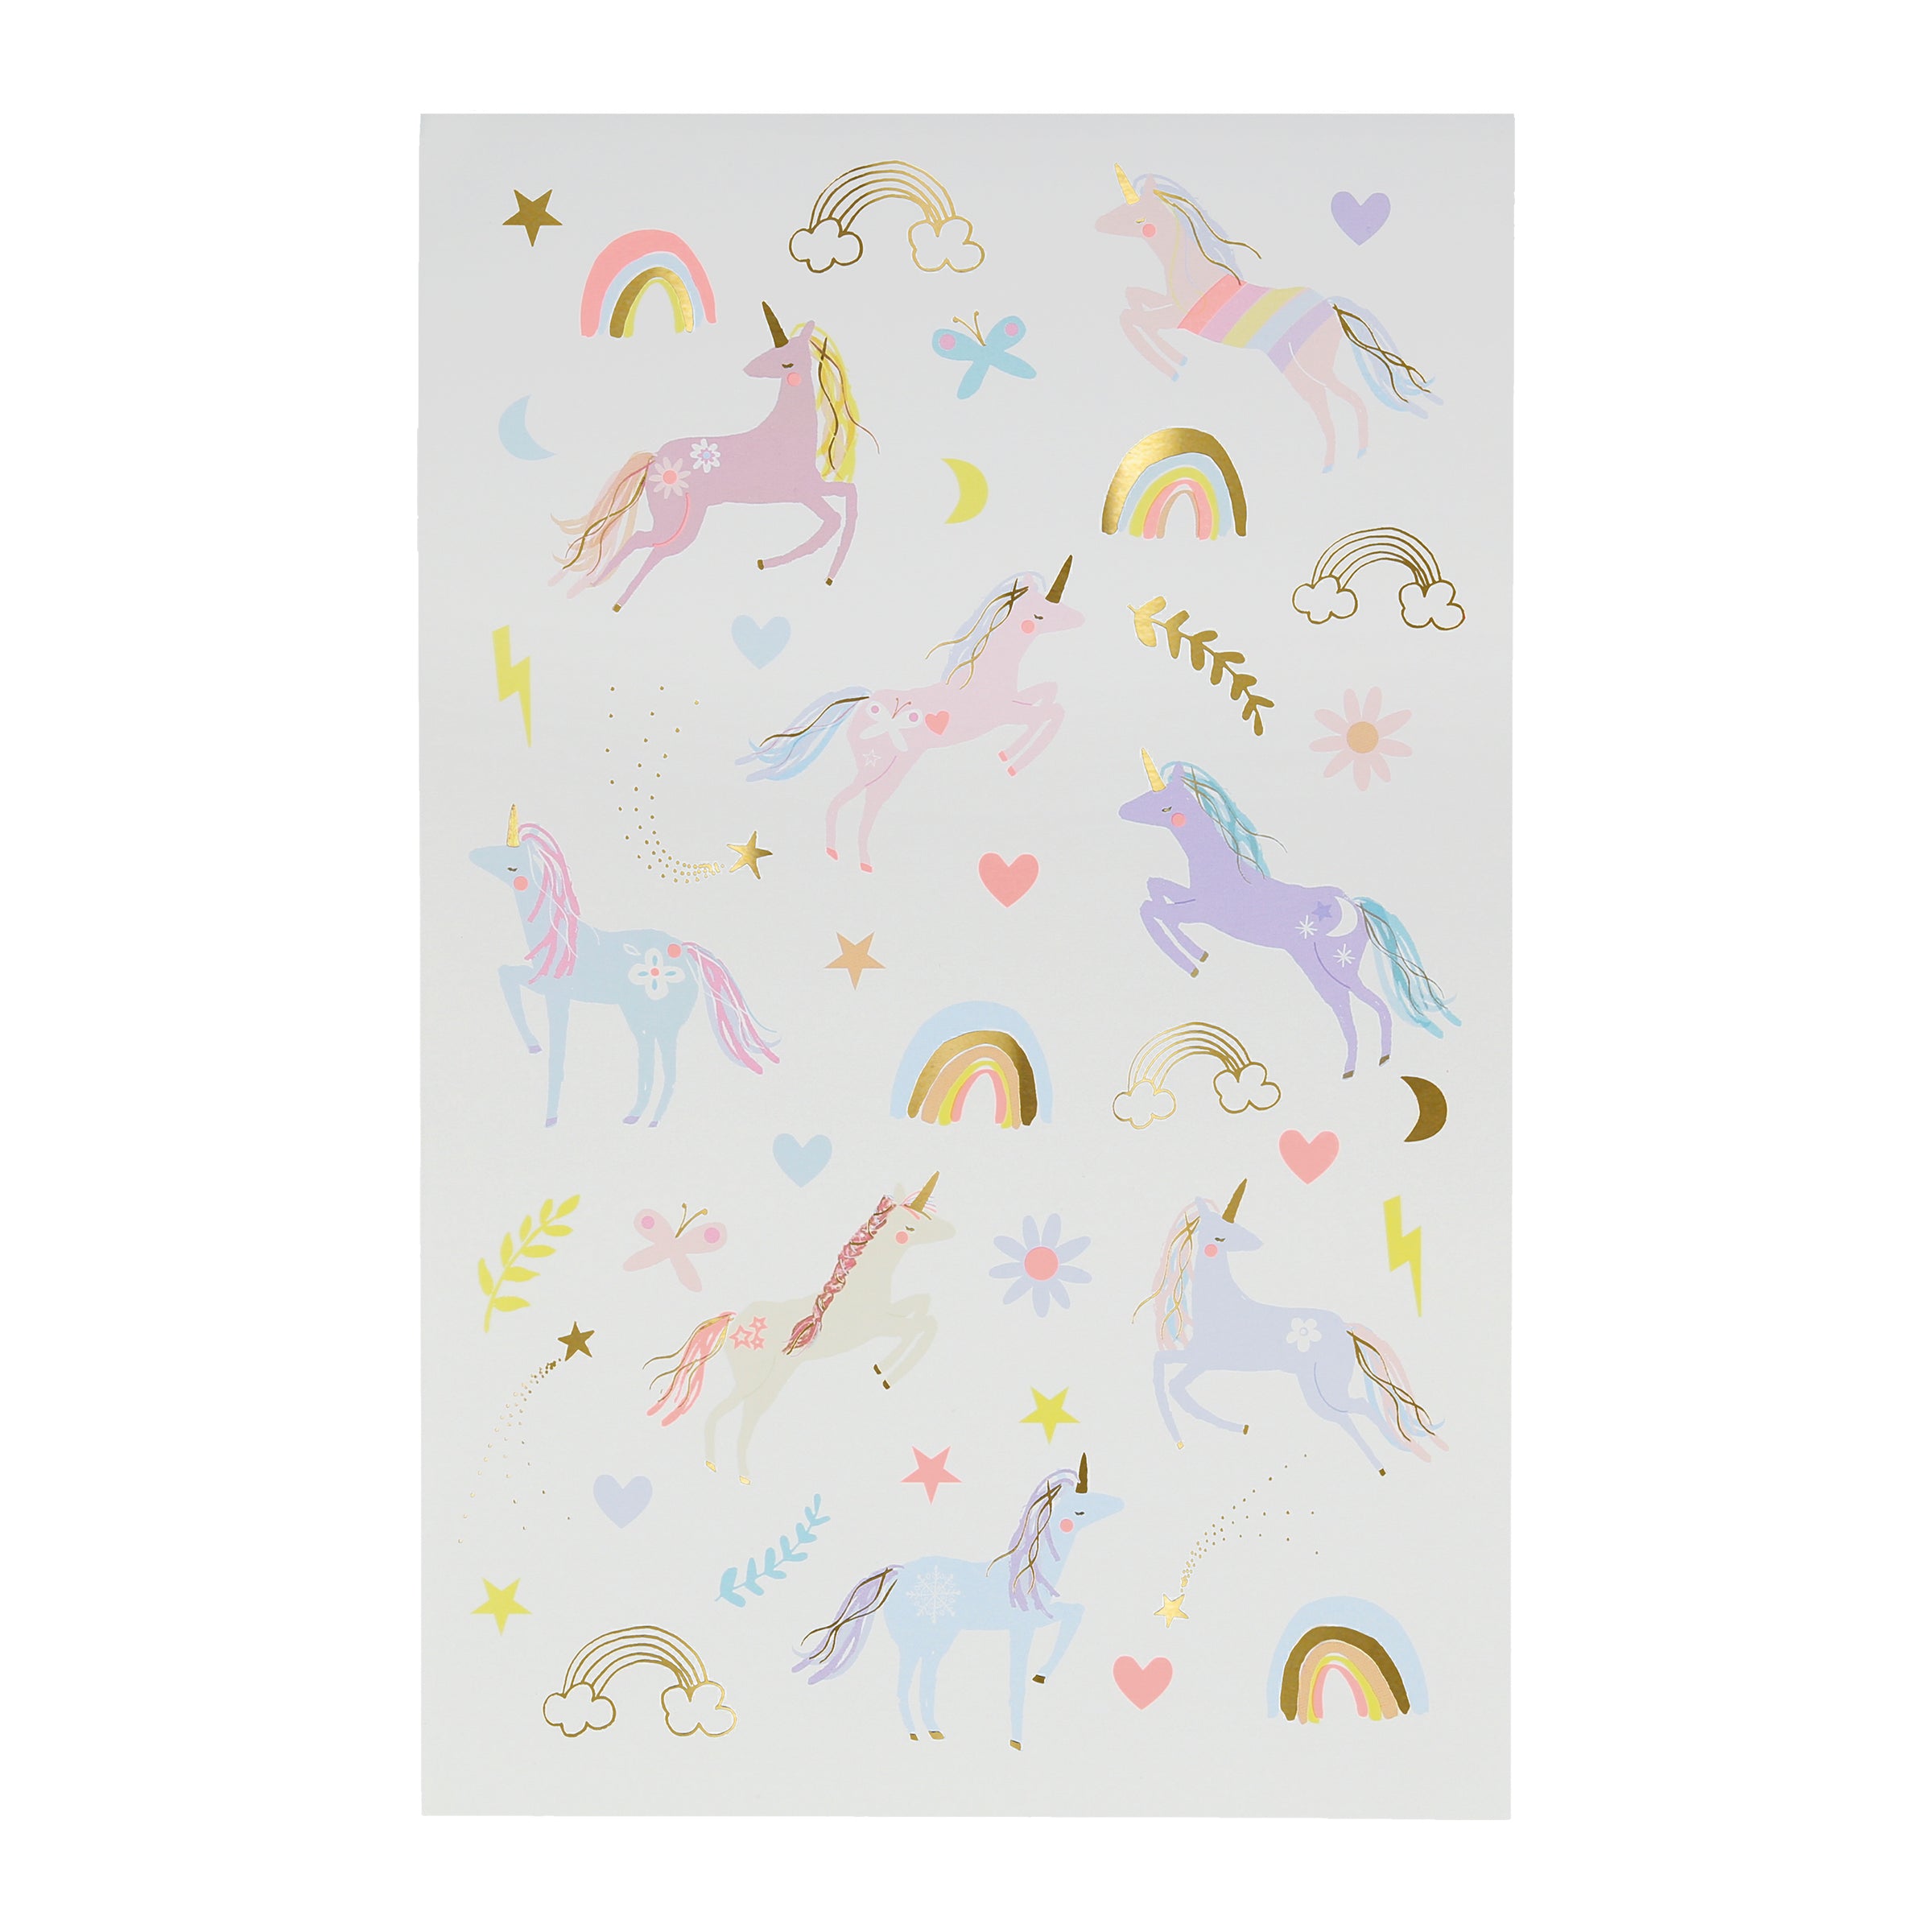 Our temporary unicorn tattoos are perfect for a unicorn party or for princess party supplies.